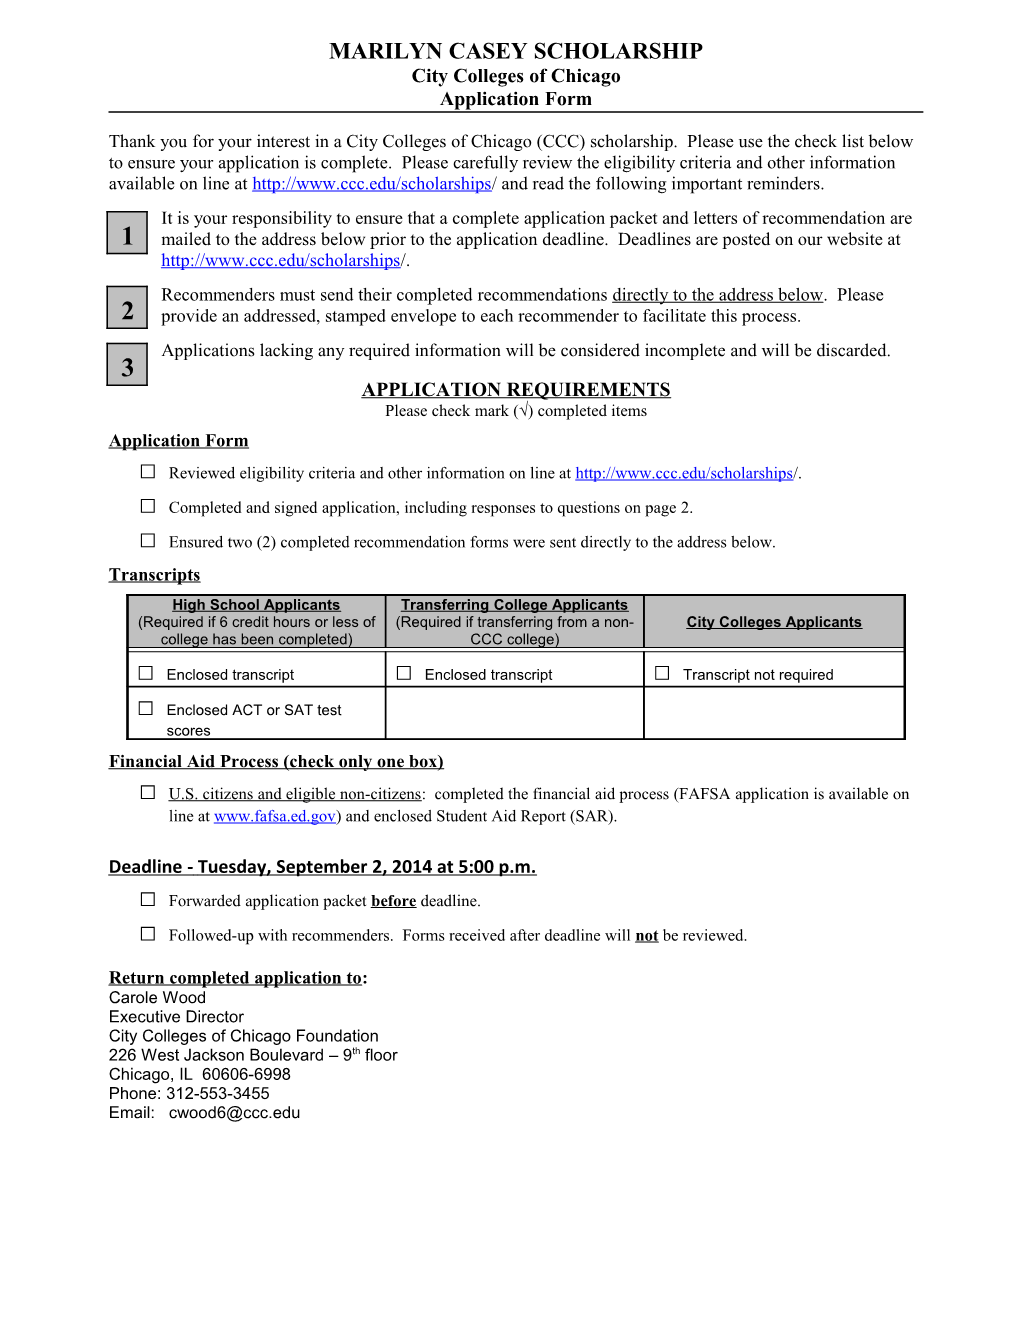 City Colleges of Chicago Marilyn Casey Scholarship Application - 2014